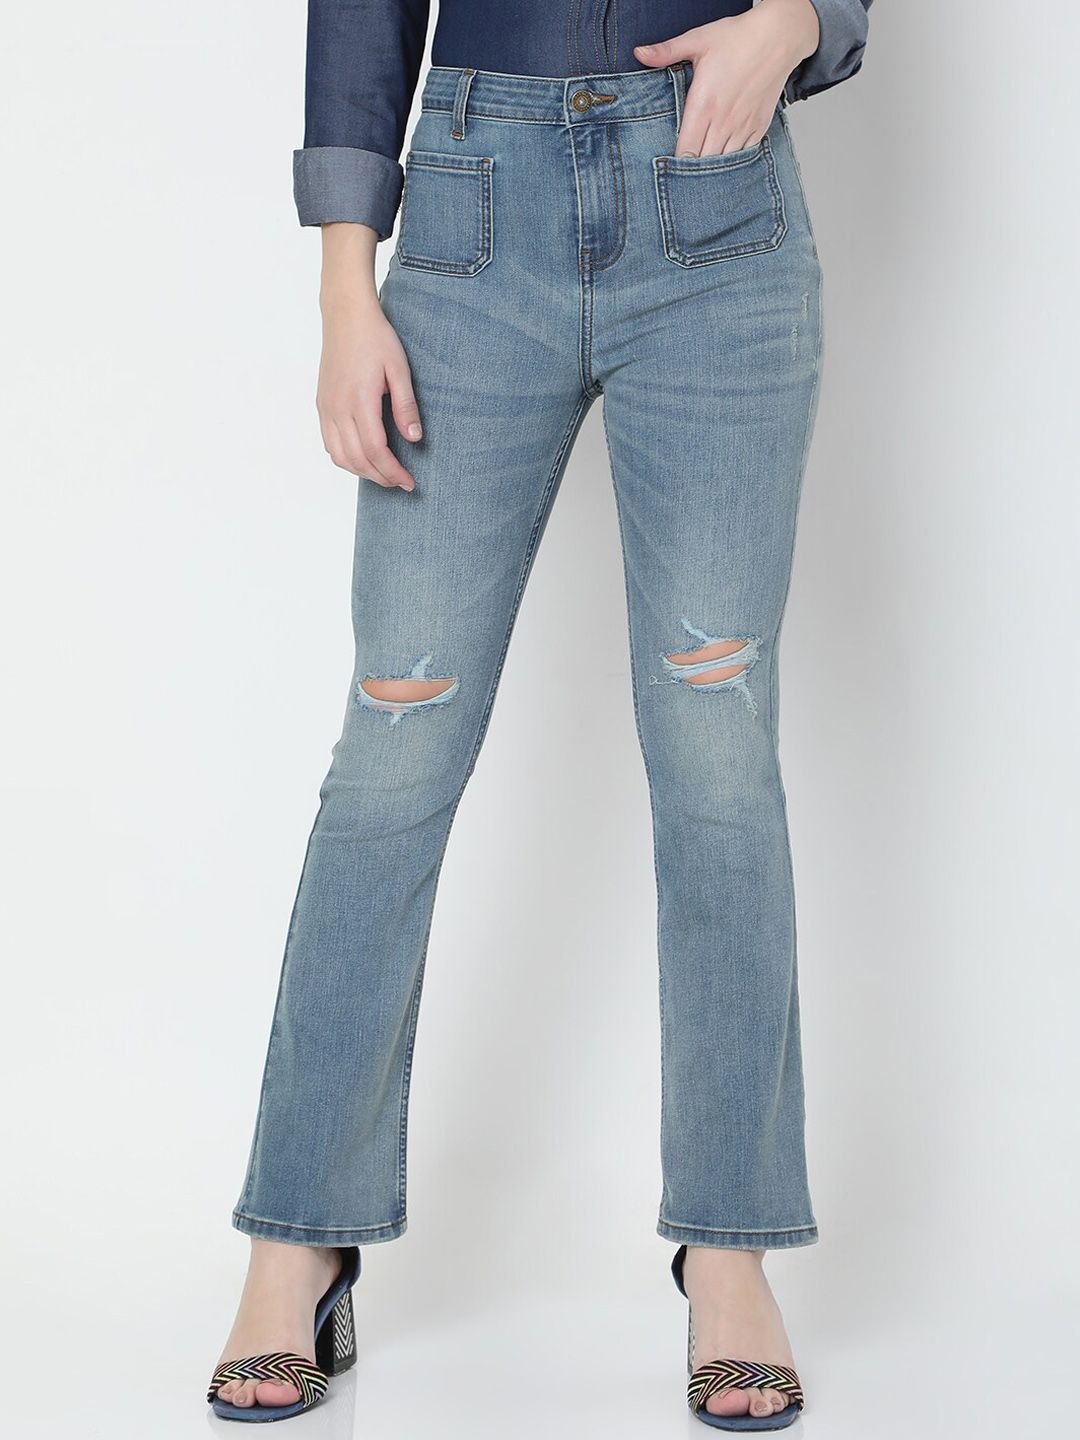 Vero Moda Women Blue High-Rise Mildly Distressed Light Fade Stretchable Jeans Price in India